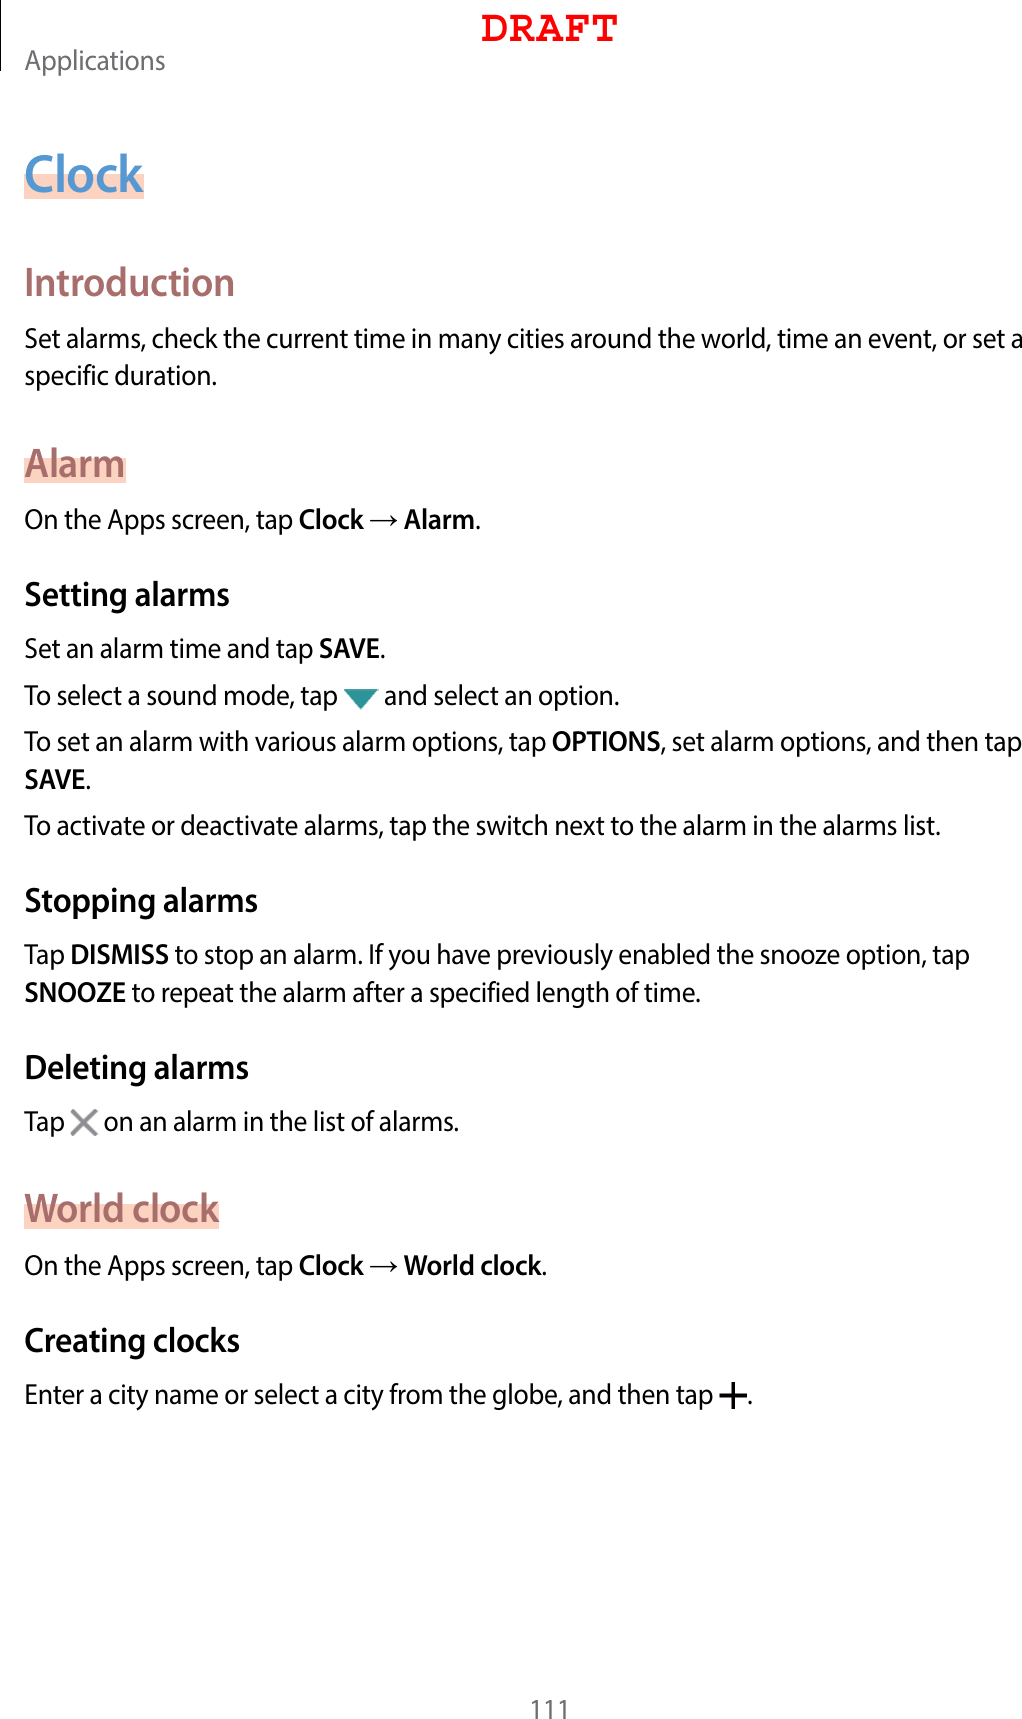 Applications111ClockIntroductionSet alarms, check the current time in many cities around the world, time an event, or set a specific duration.AlarmOn the Apps screen, tap Clock  Alarm.Setting alarmsSet an alarm time and tap SAVE.To select a sound mode, tap   and select an option.To set an alarm with various alarm options, tap OPTIONS, set alarm options, and then tap SAVE.To activate or deactivate alarms, tap the switch next to the alarm in the alarms list.Stopping alarmsTap DISMISS to stop an alarm. If you have previously enabled the snooze option, tap SNOOZE to repeat the alarm after a specified length of time.Deleting alarmsTap   on an alarm in the list of alarms.World clockOn the Apps screen, tap Clock  World clock.Creating clocksEnter a city name or select a city from the globe, and then tap  .DRAFT